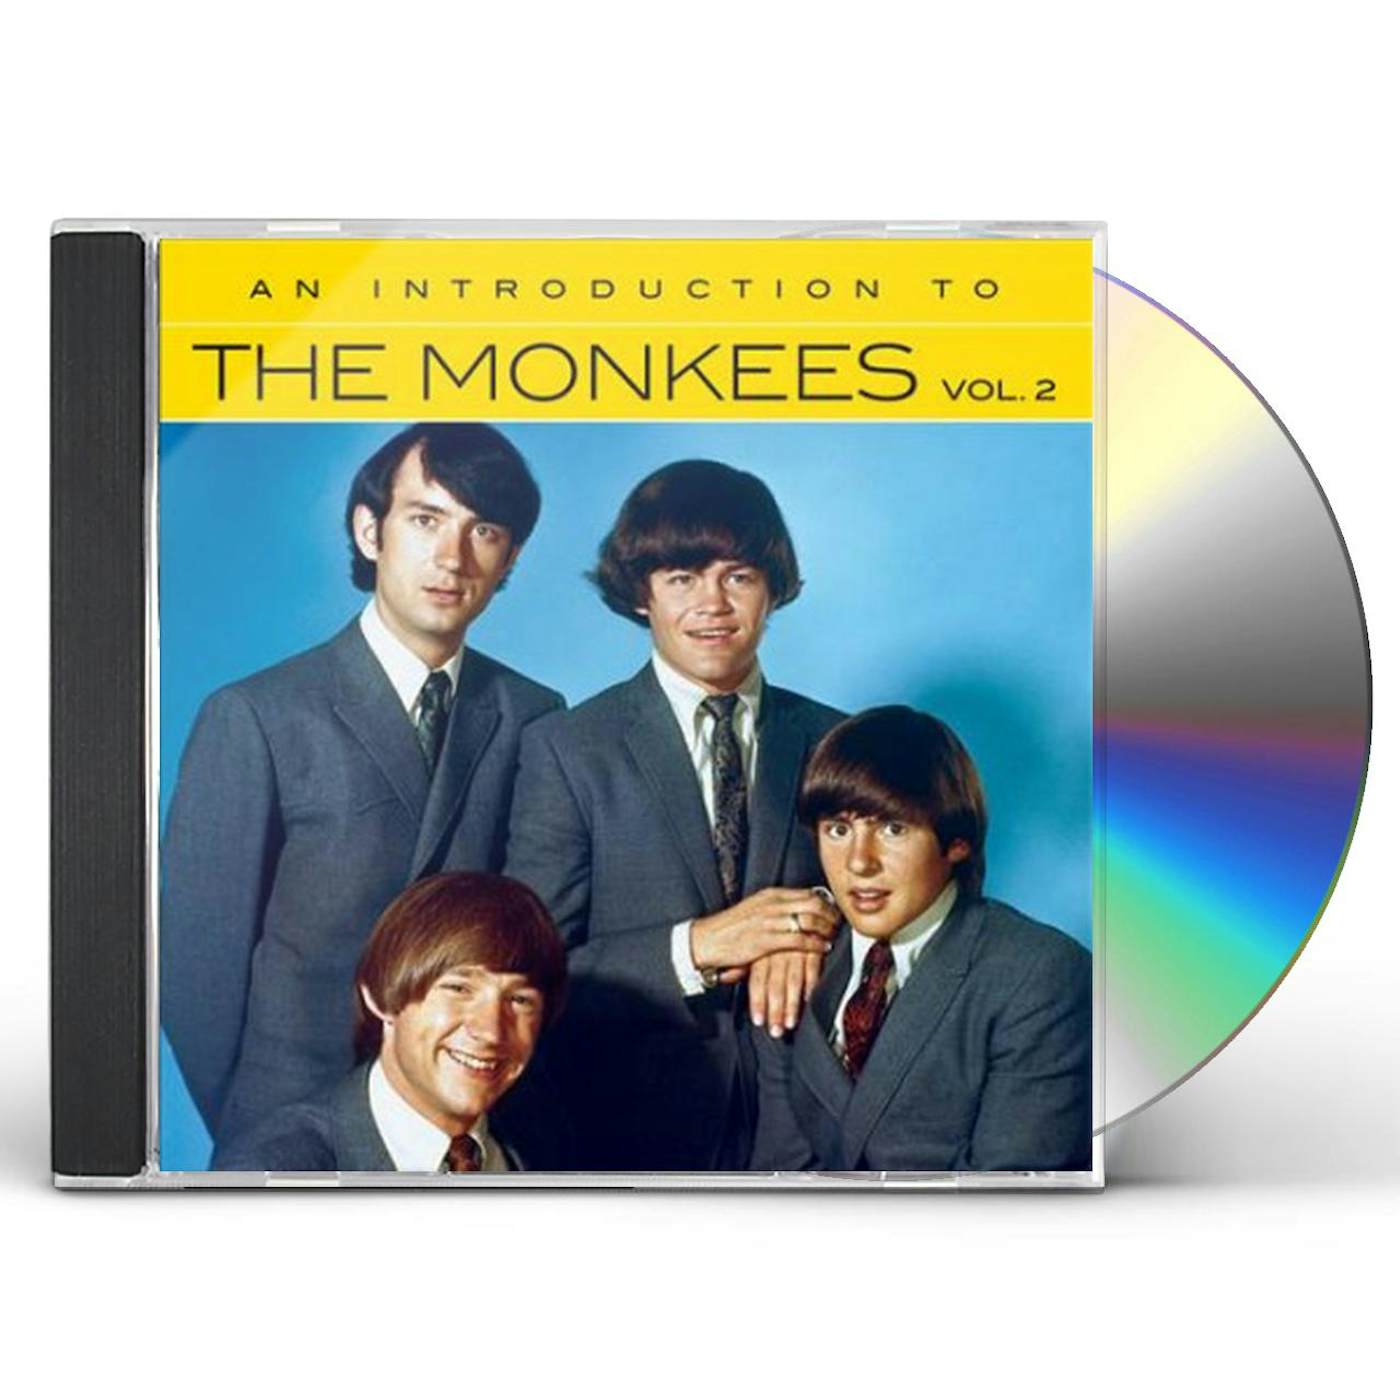 The Monkees AN INTRODUCTION TO VOL 2 CD